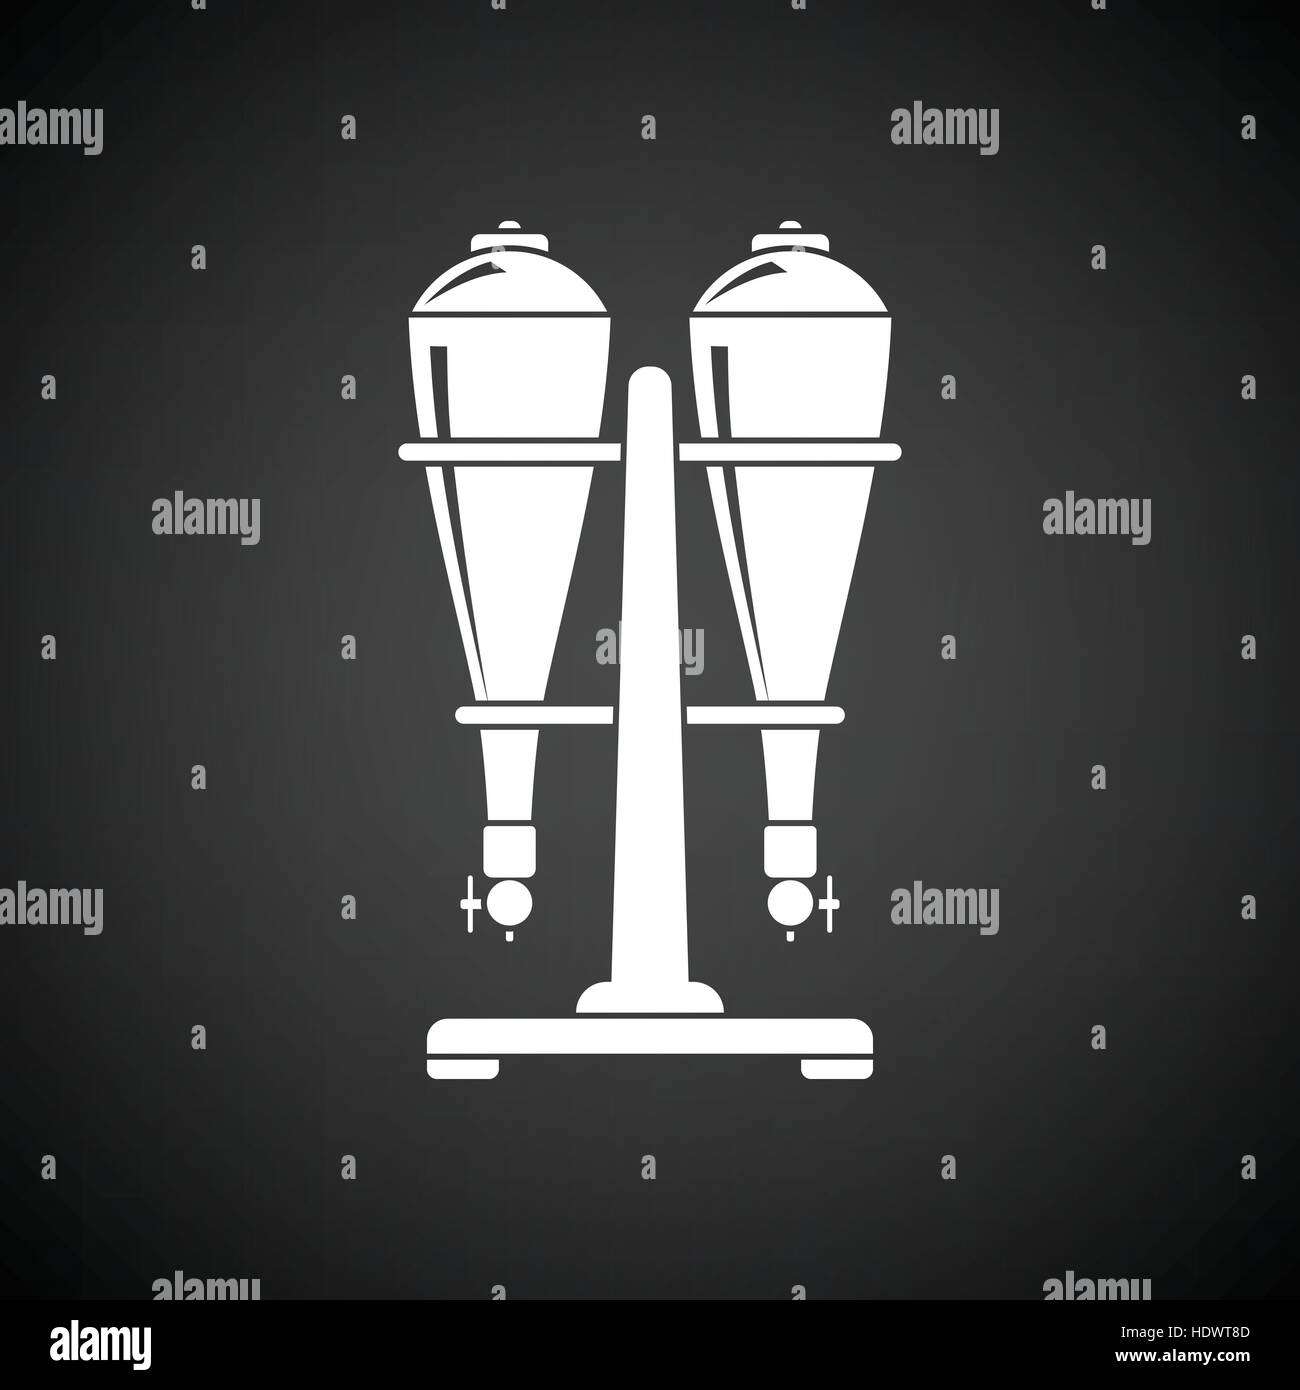 Soda siphon equipment icon. Black background with white. Vector illustration. Stock Vector